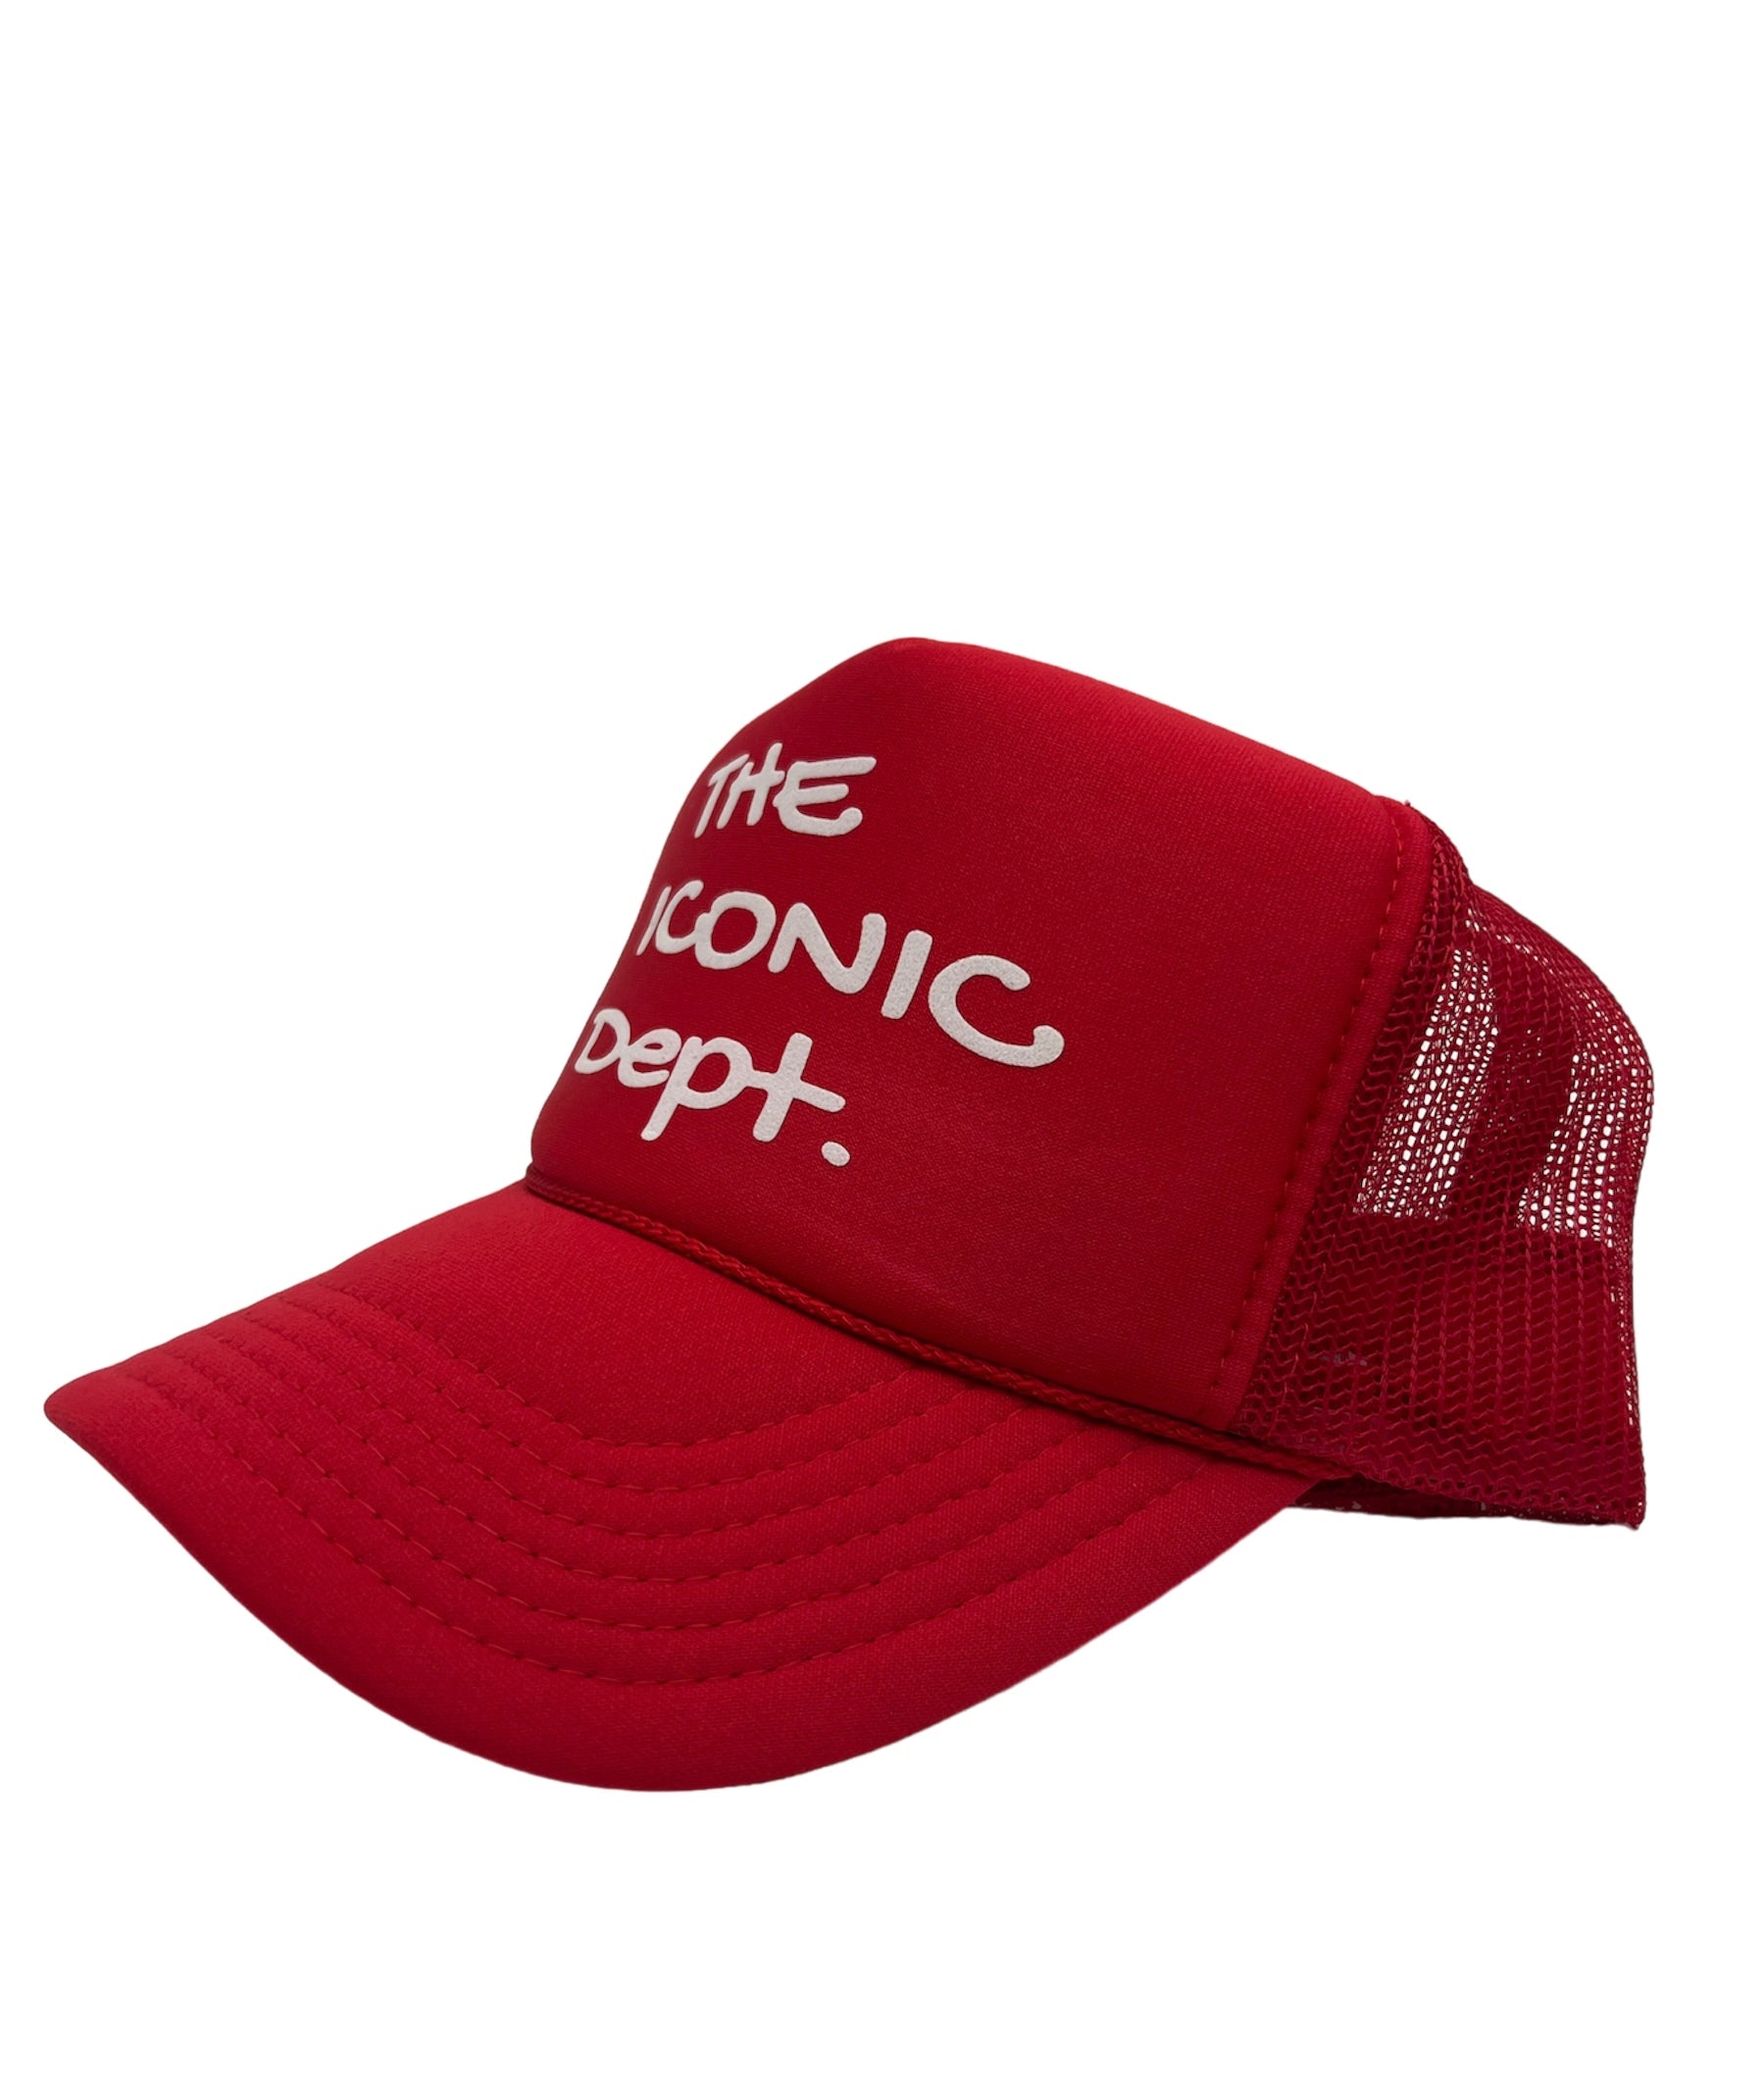 The Iconic Dept. Hat